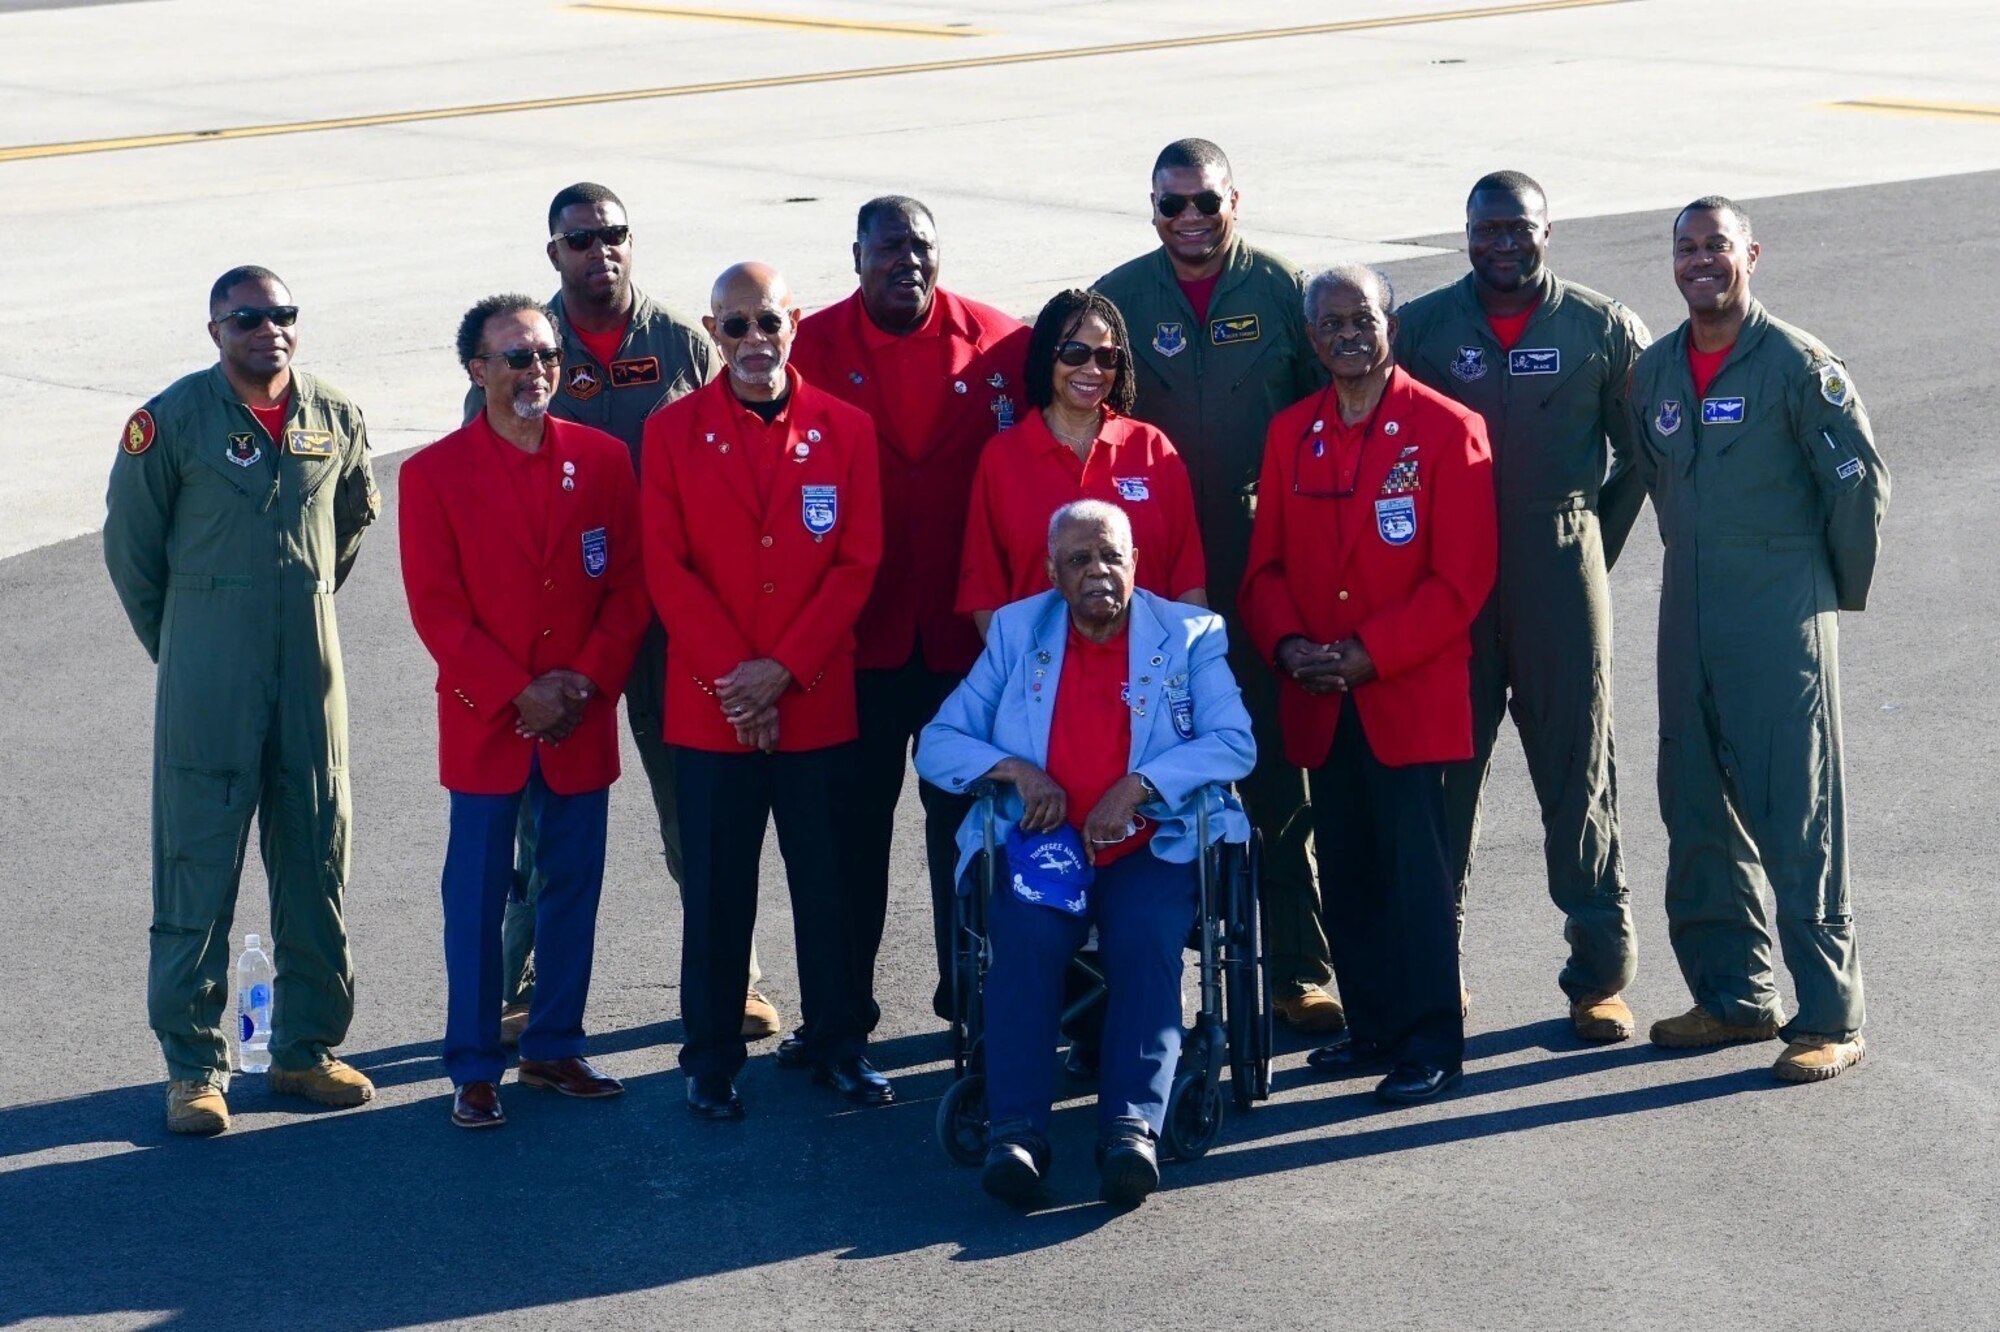 Eleven people stand smiling next to each other on a flight line.